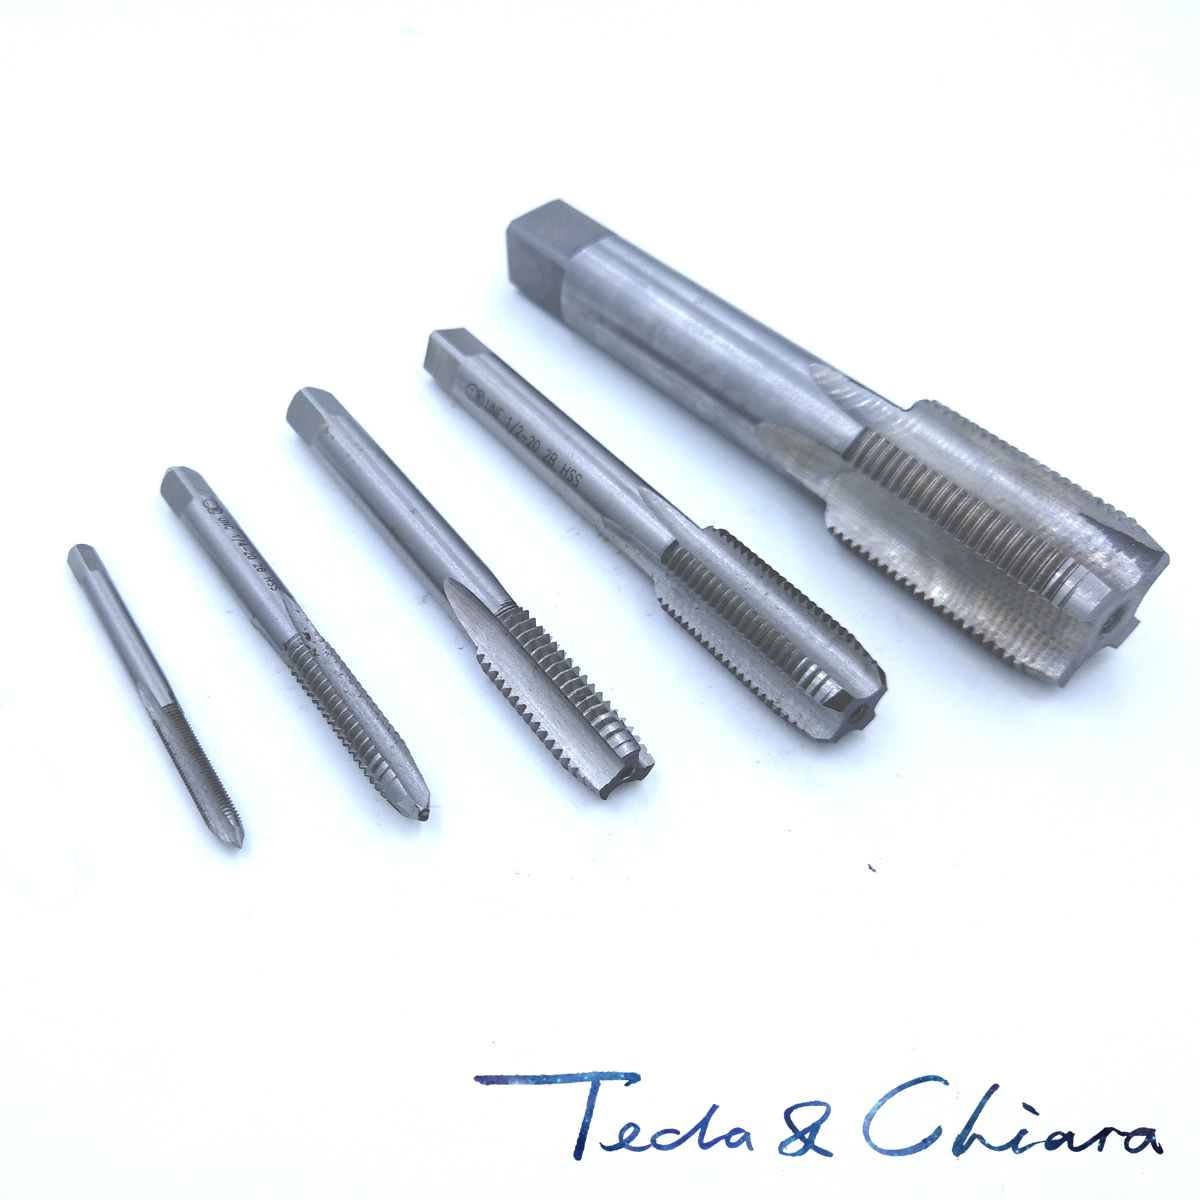 1Pc M15 X 0.5mm 0.75mm 1mm 1.25mm 1.5mm 2mm Metric HSS Right Hand Tap Threading Tools For Mold Machining * 0.5 0.75 1 1.25 1.5 2